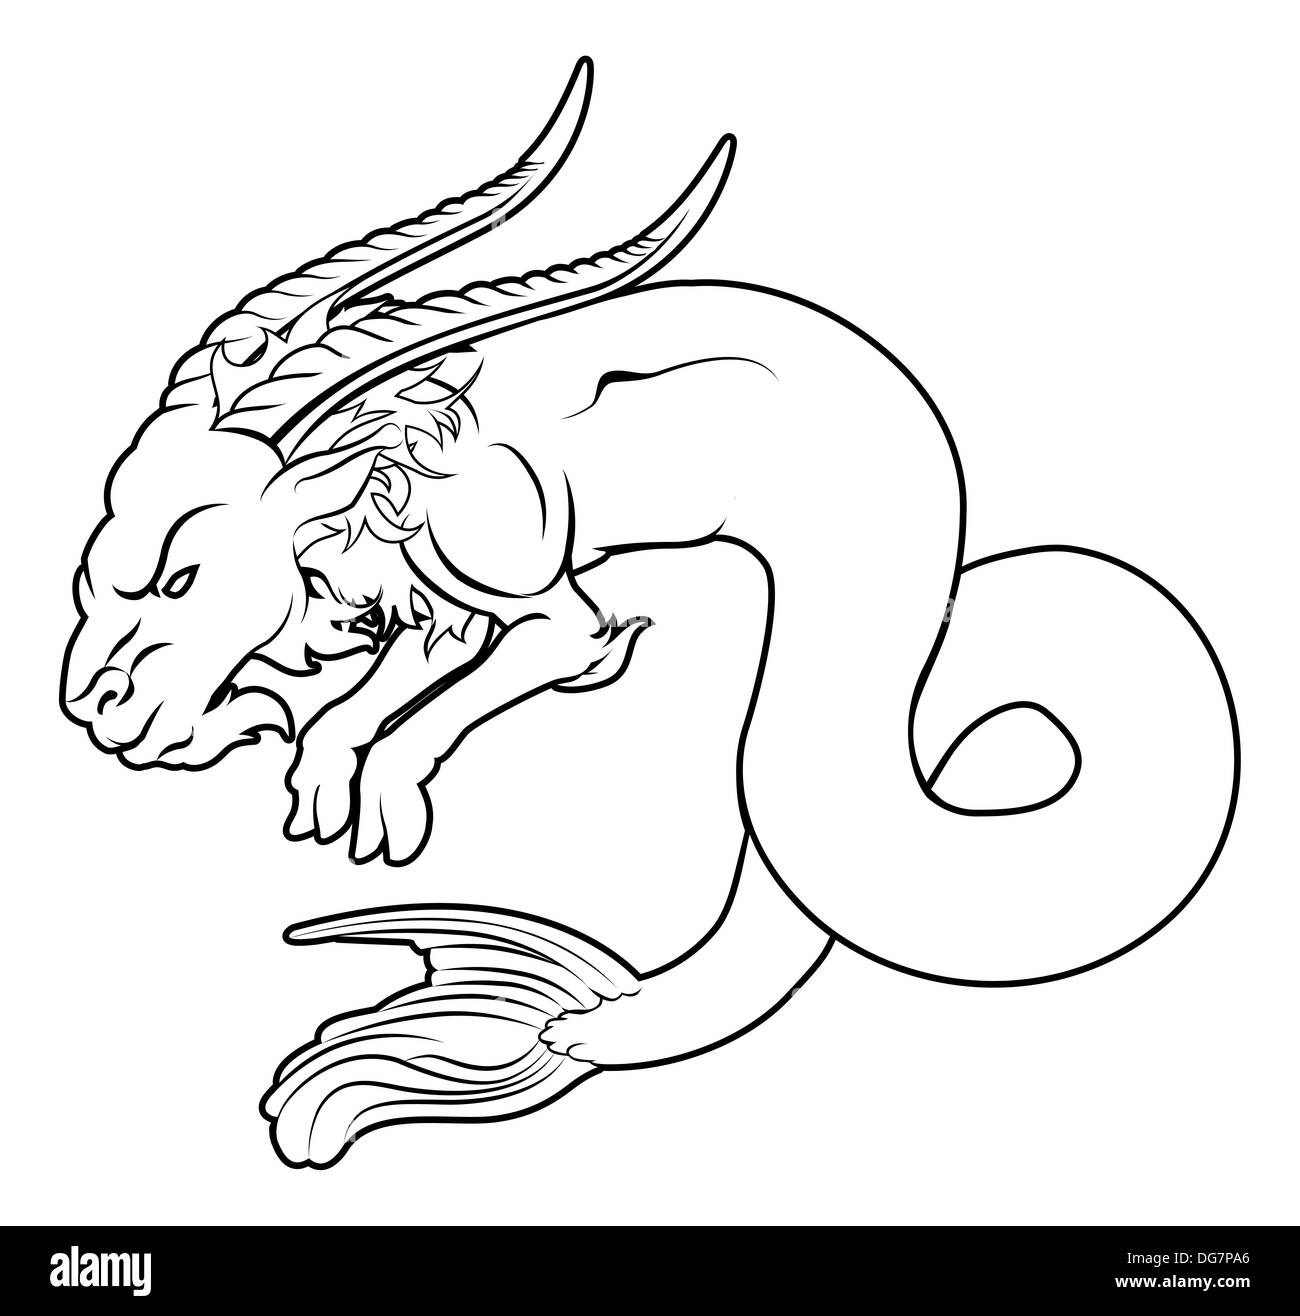 An illustration of a stylised black sea goat perhaps a sea goat tattoo Stock Photo